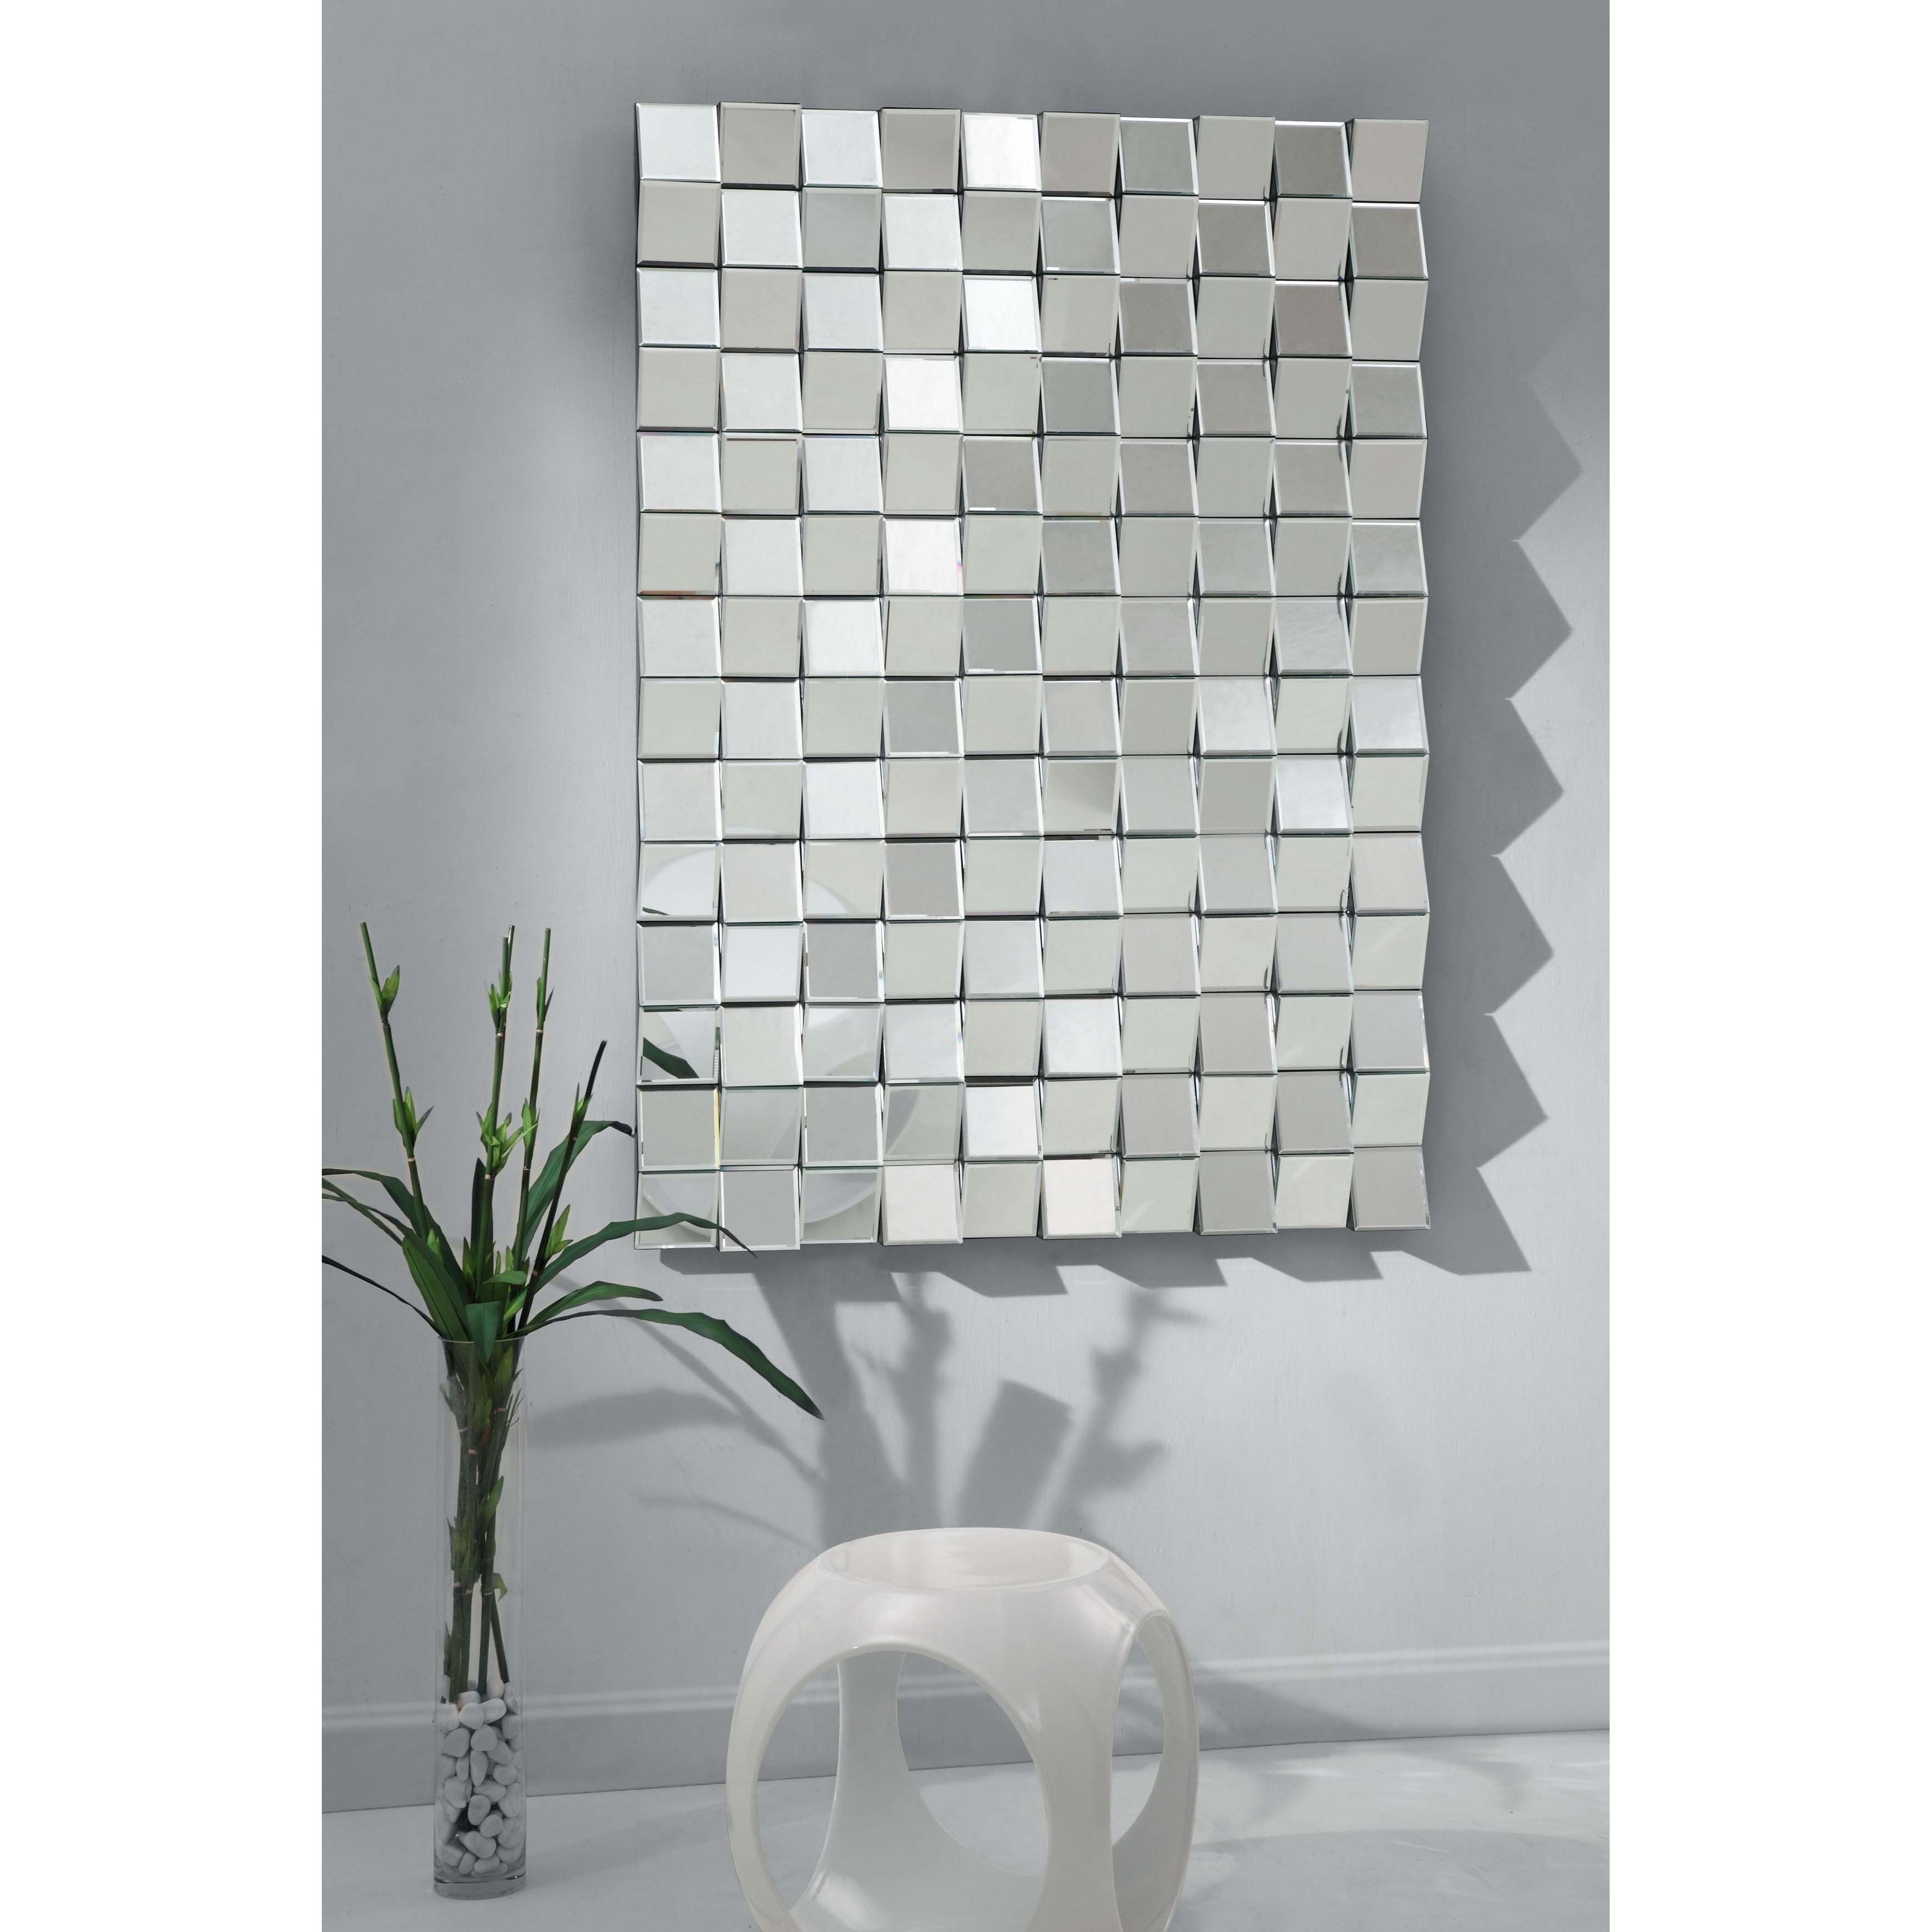 Pennsburg Rectangle Wall Mirror Regarding Most Recent Featuring A Stunning Checkerboard Motif, This Remarkable Wall Mirror (View 11 of 20)